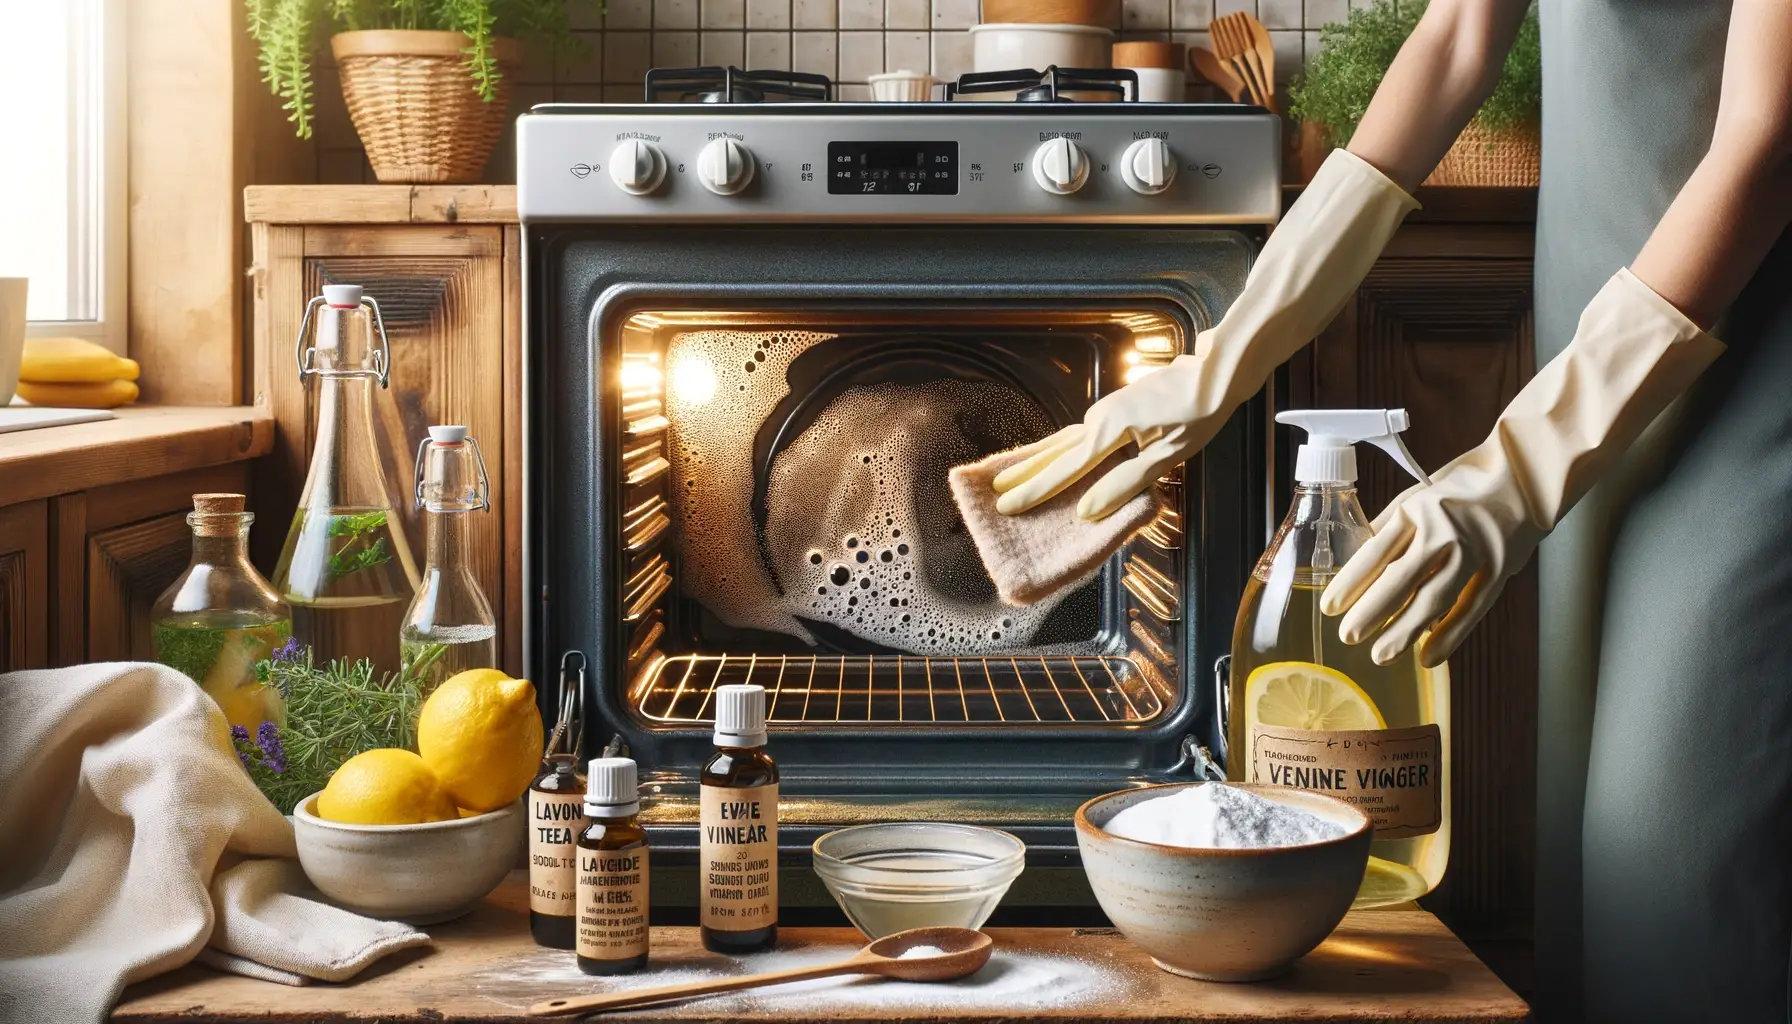 Say Goodbye to Chemicals: 4 DIY Natural Oven Cleaners Recipes